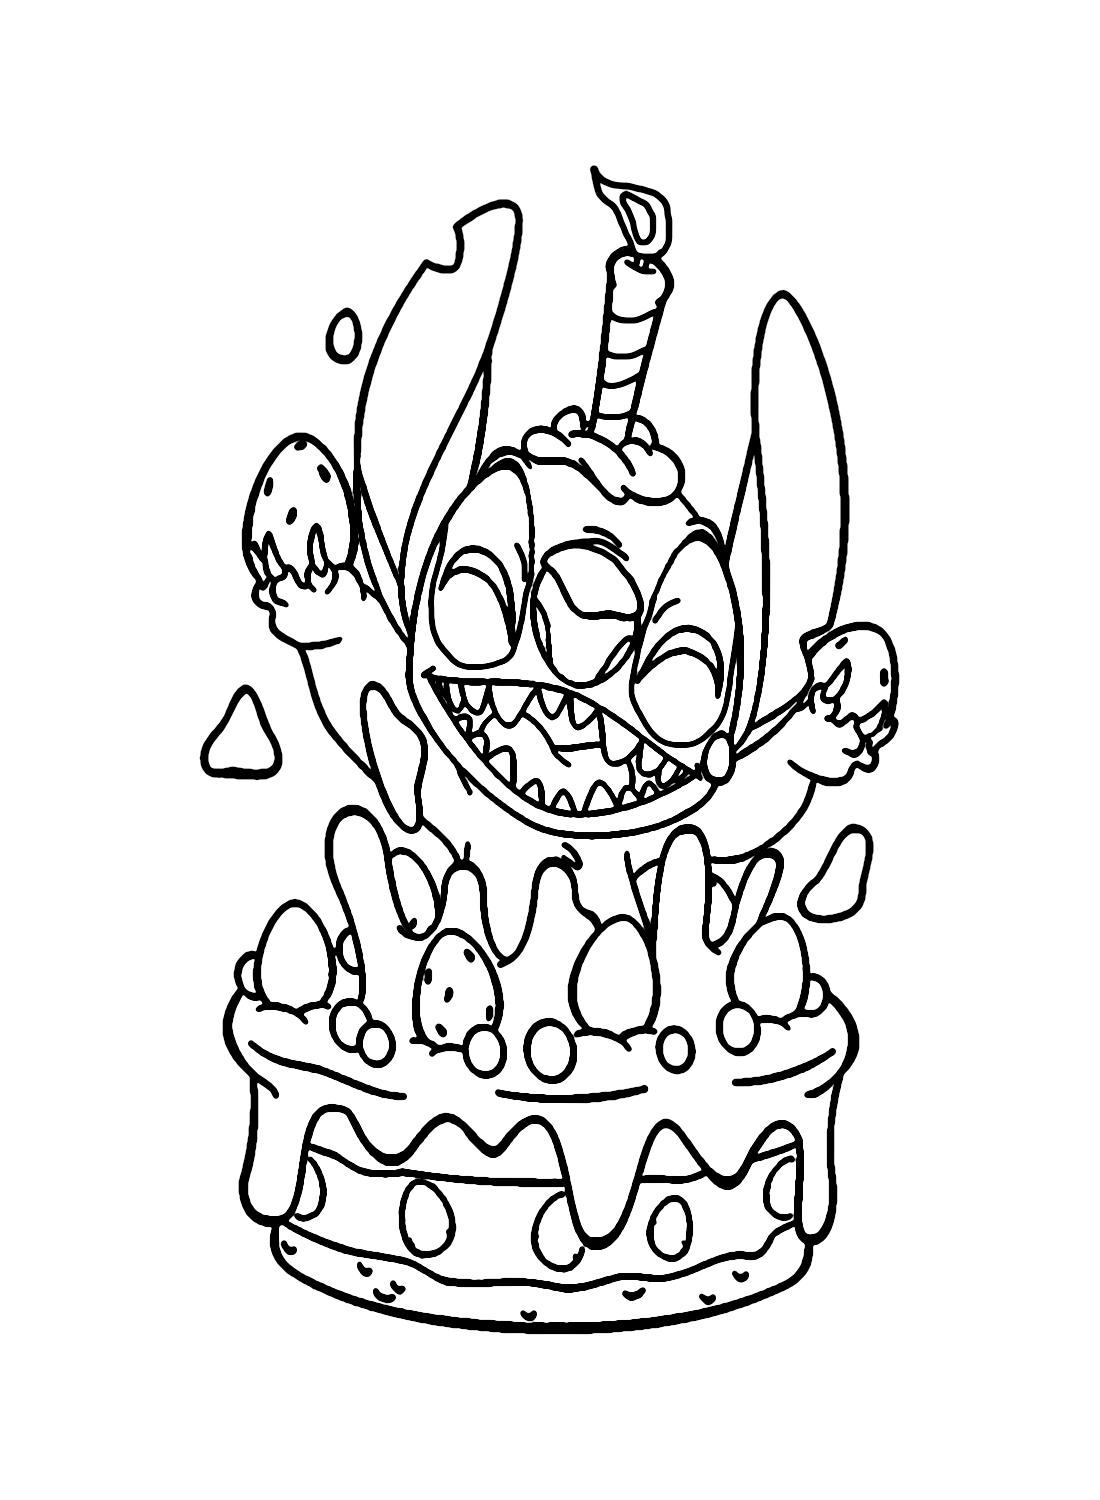 Happy Birthday Stitch Coloring Page Coloring Page